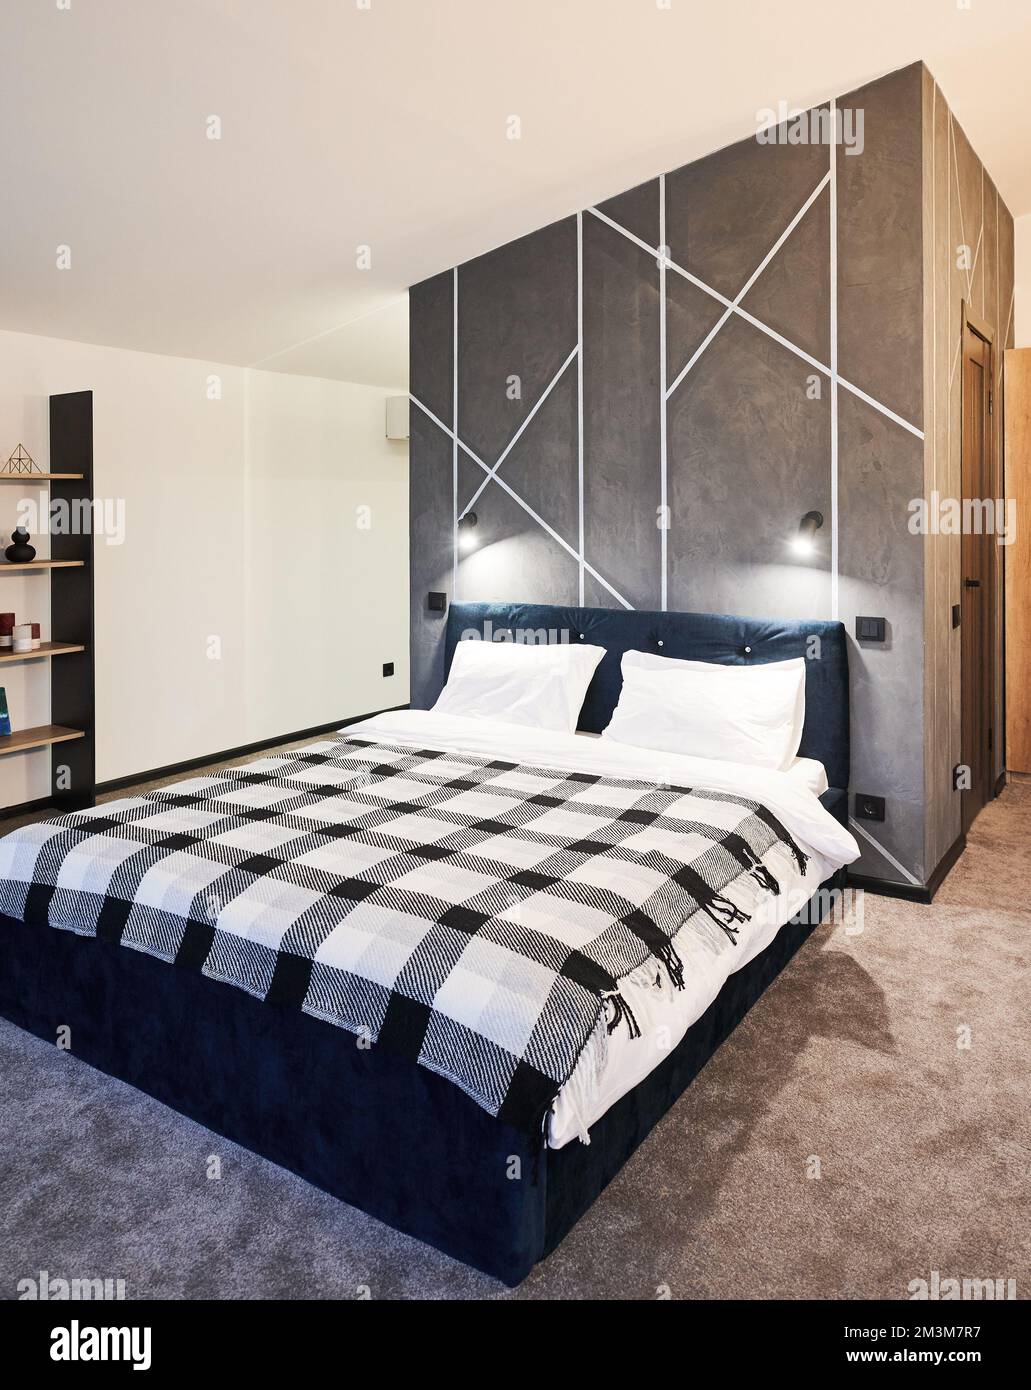 https://c8.alamy.com/comp/2M3M7R7/minimalist-interior-of-bedroom-with-big-bed-indoor-front-view-of-wide-bed-with-plaid-blanket-against-gray-wall-with-geometric-ornament-in-sleeping-area-concept-of-interior-2M3M7R7.jpg